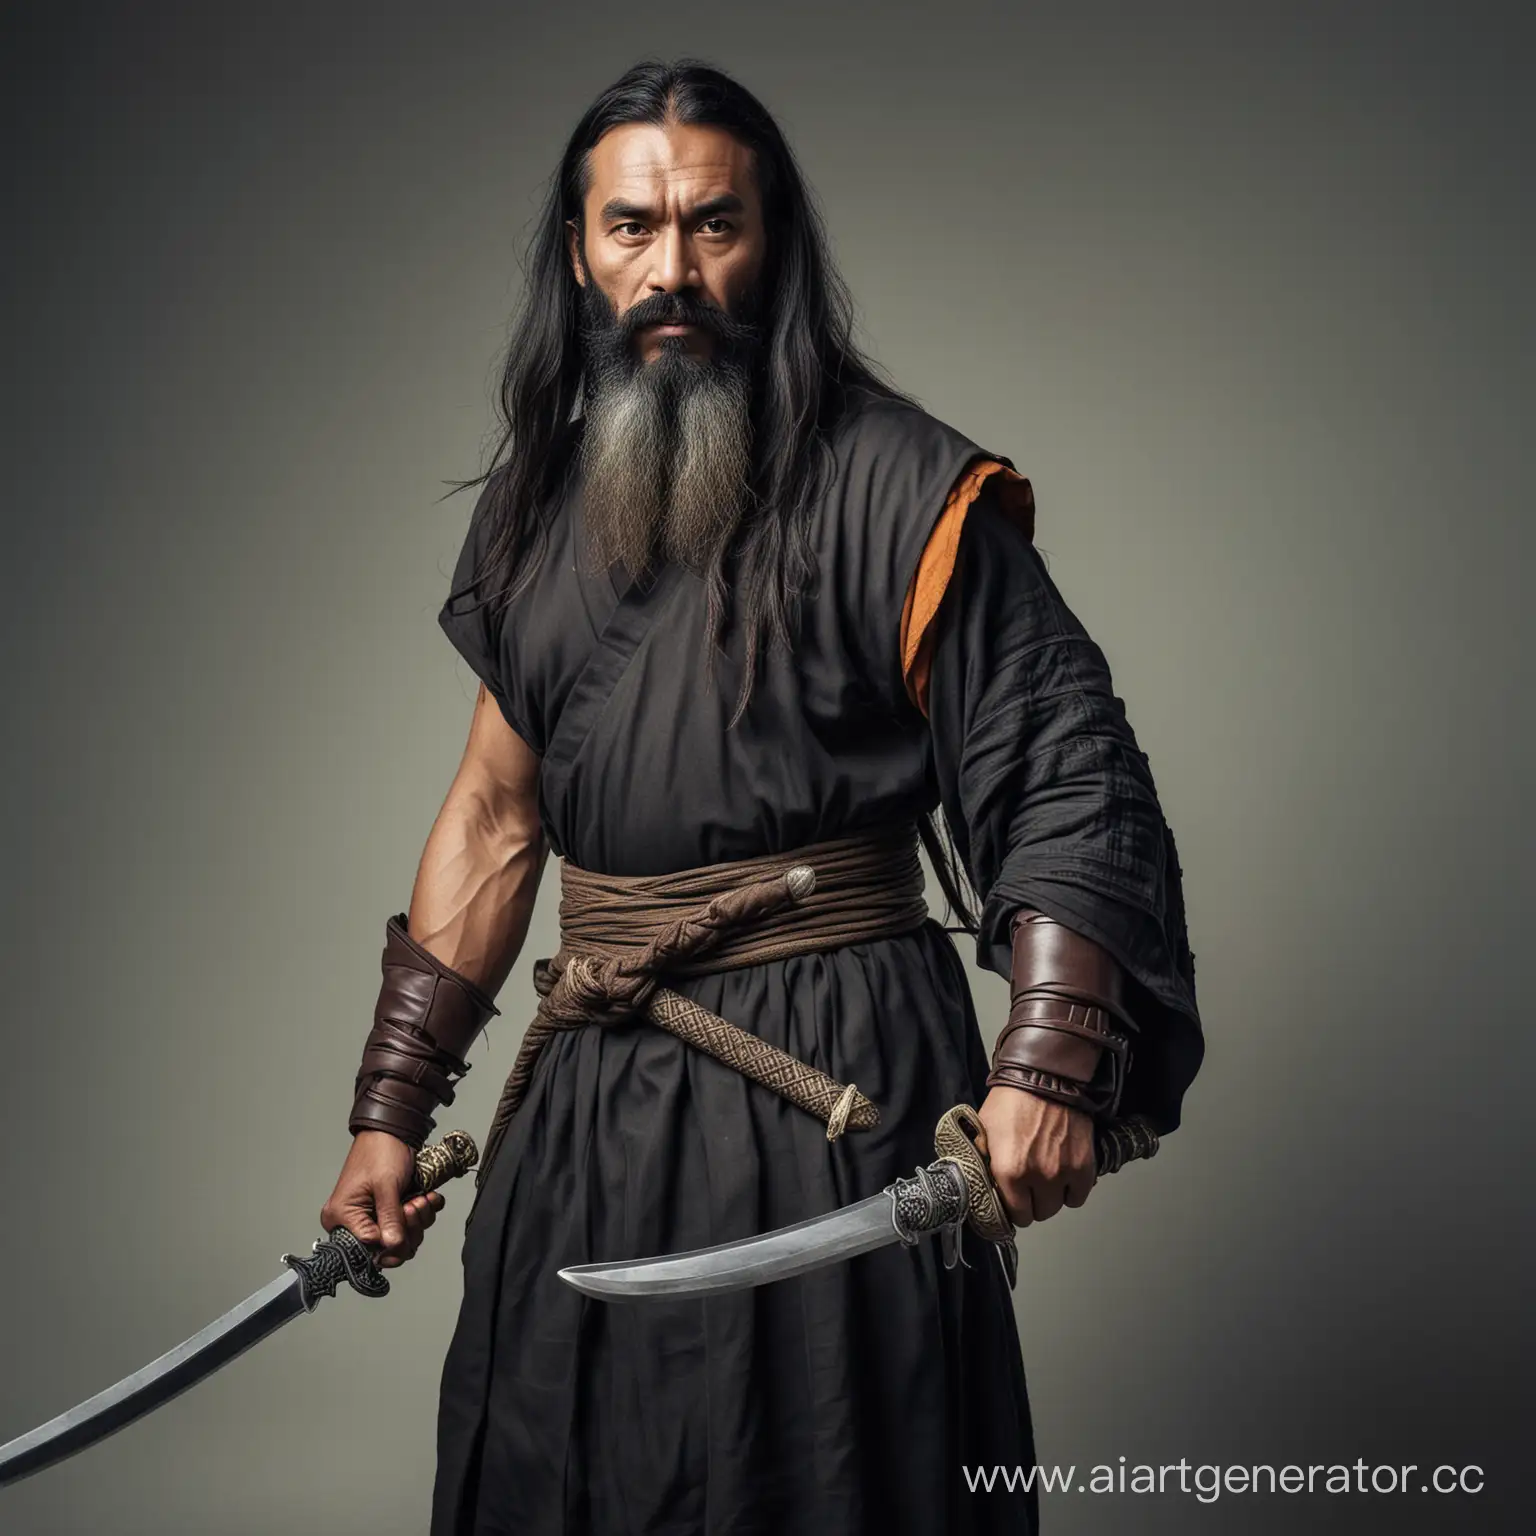 Experienced-Monk-Warrior-wielding-Sword-with-Long-Black-Hair-and-Beard